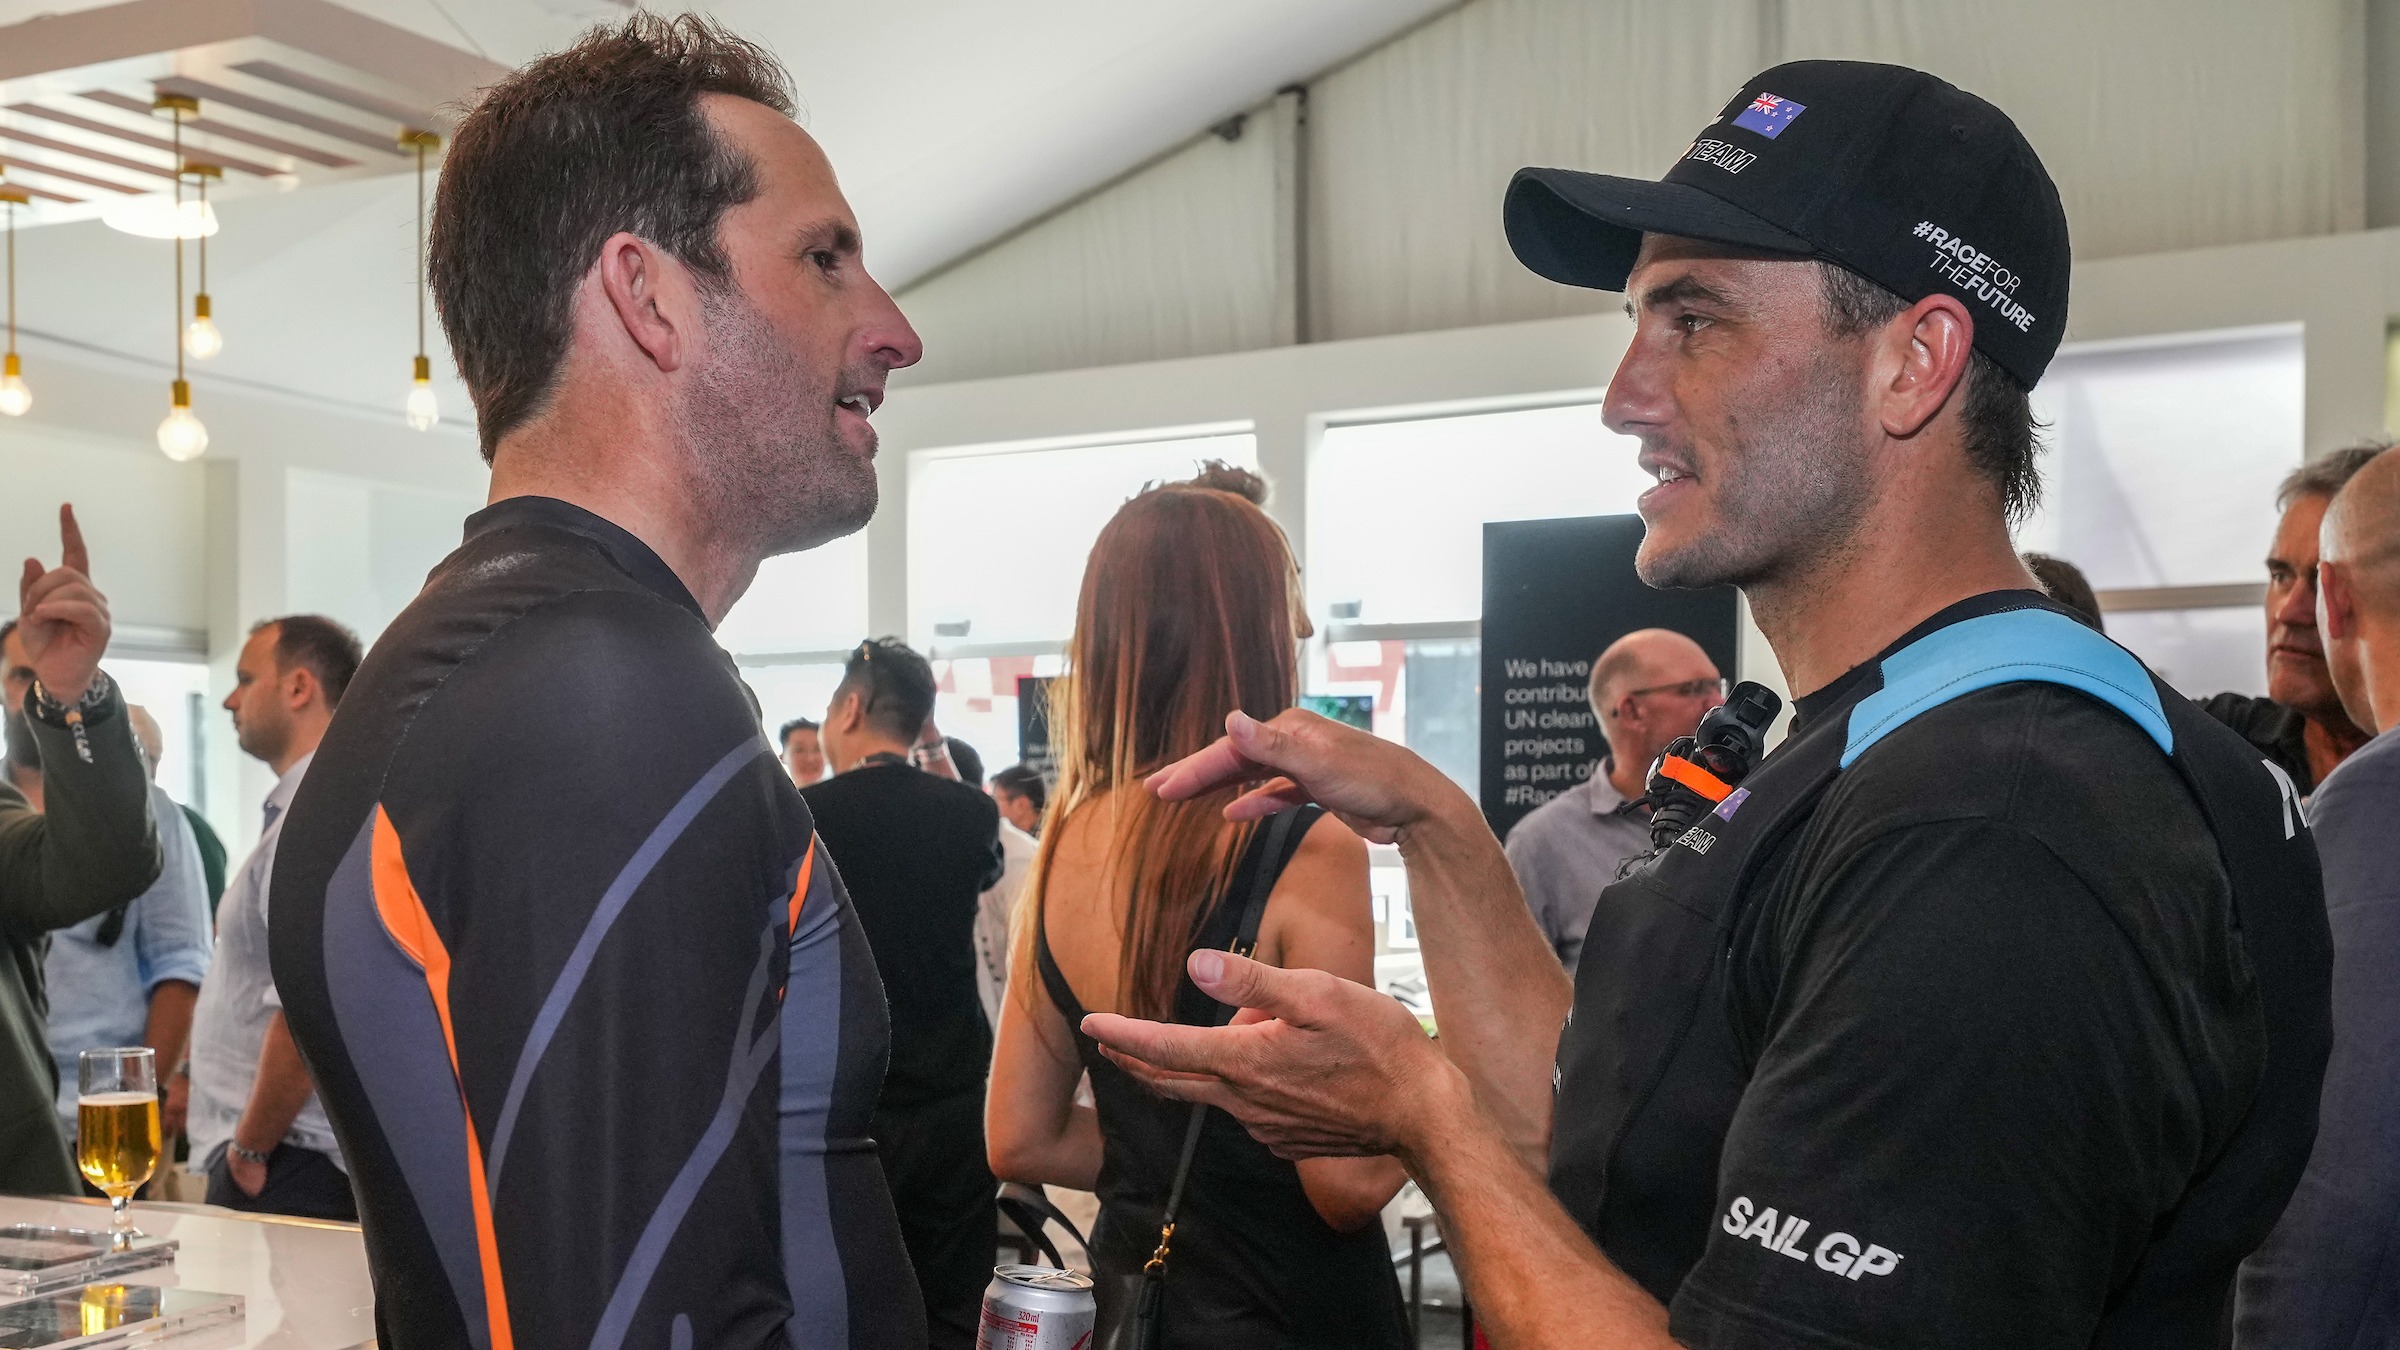 Season 4 // Emirates GBR driver Ben Ainslie with New Zealand wing trimmer Blair Tuke